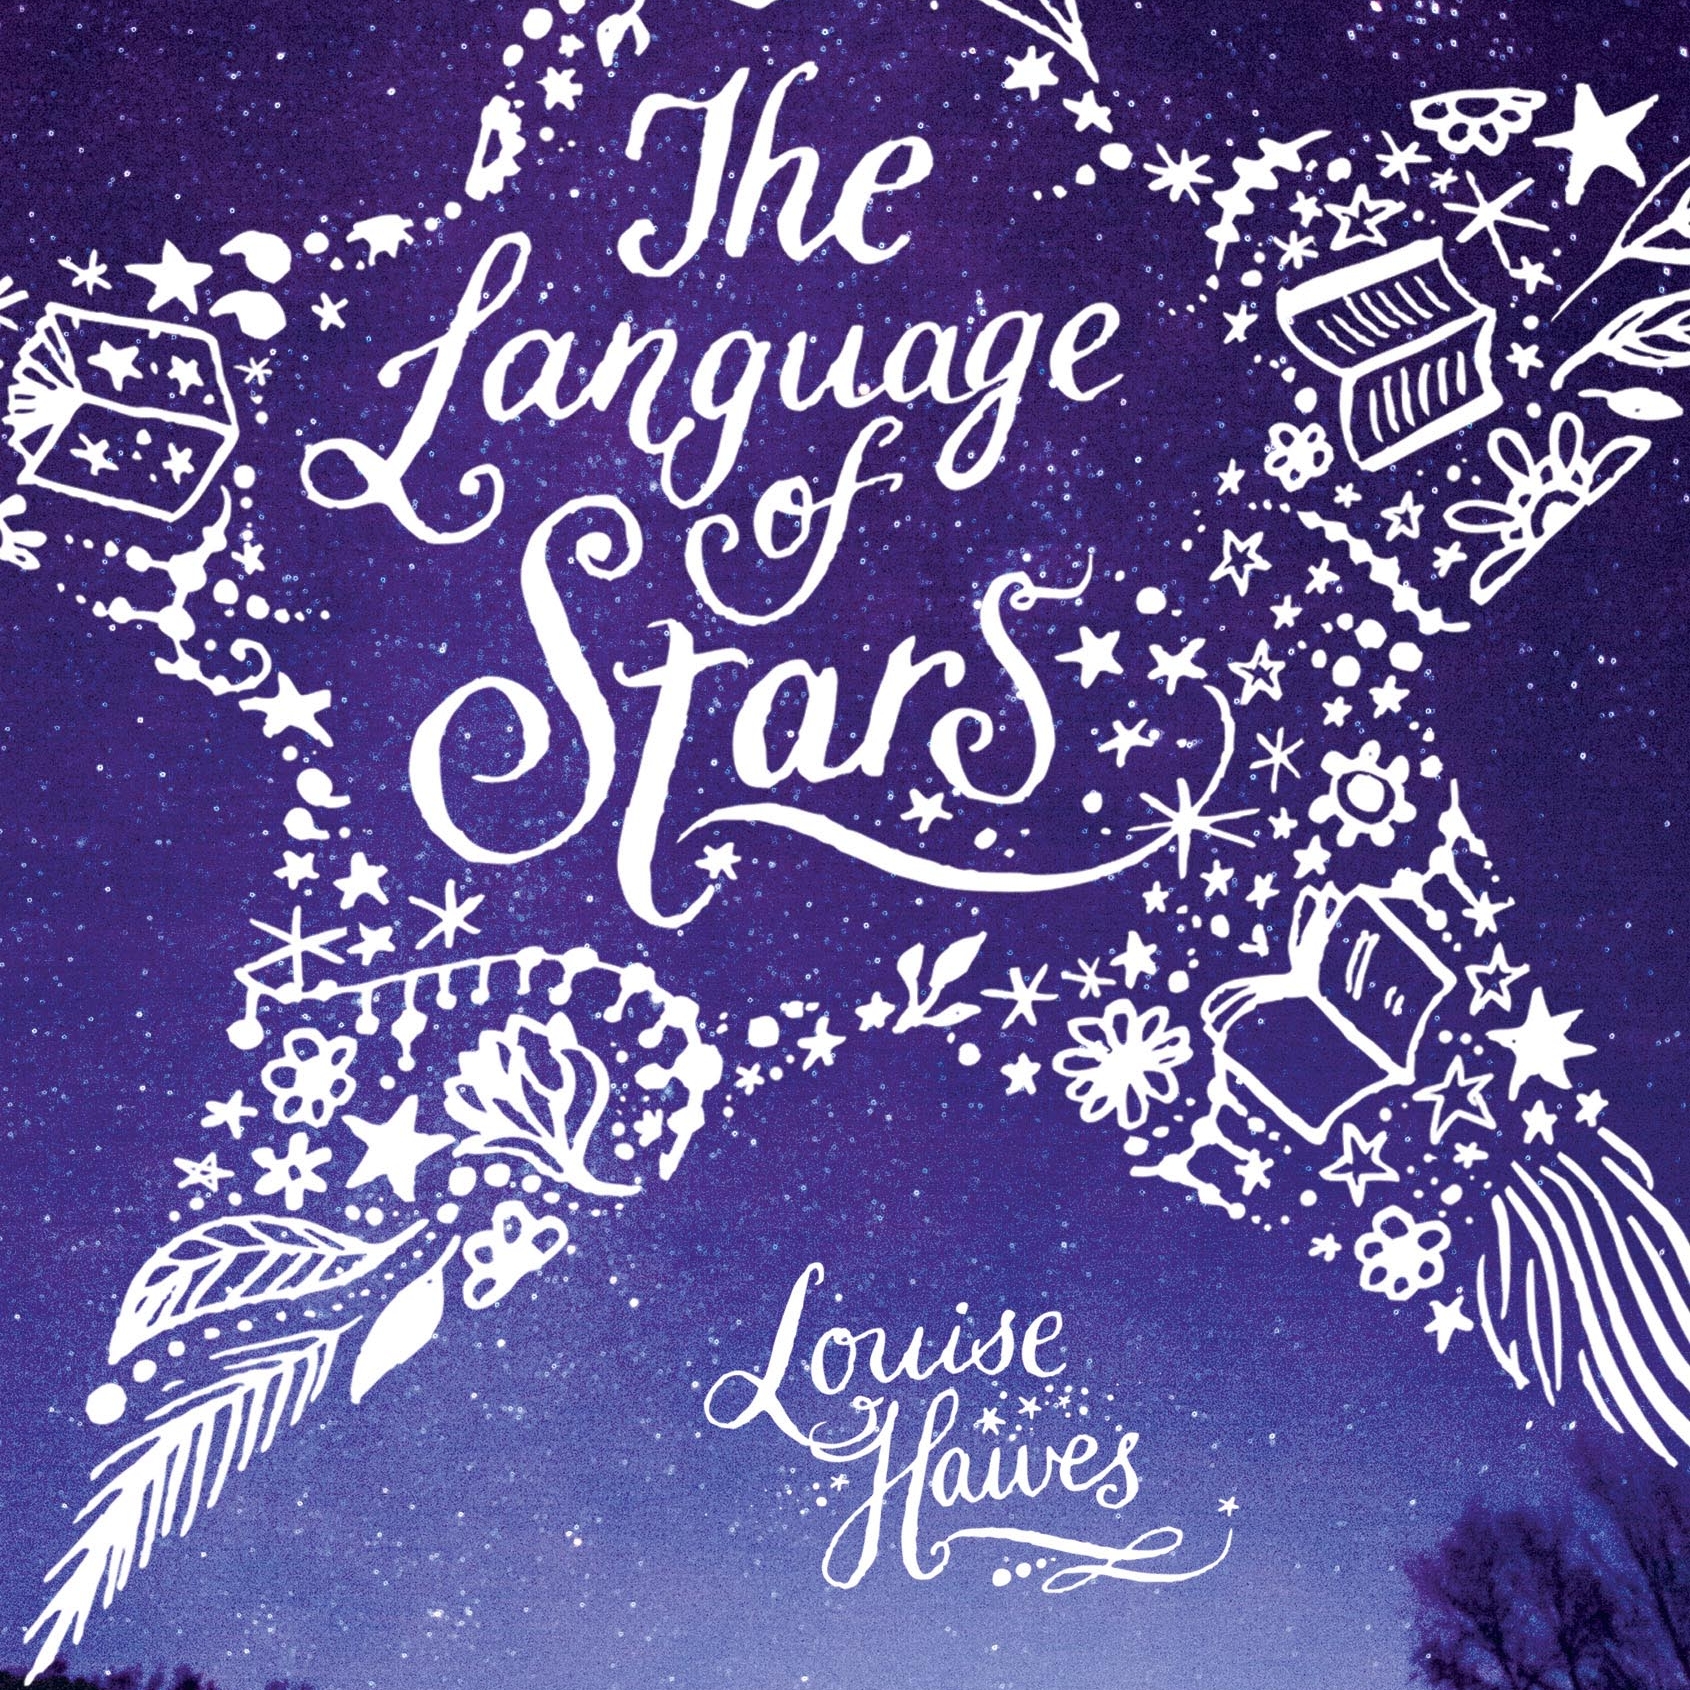 PAPERBACK: The Language of Stars by Louise Hawes